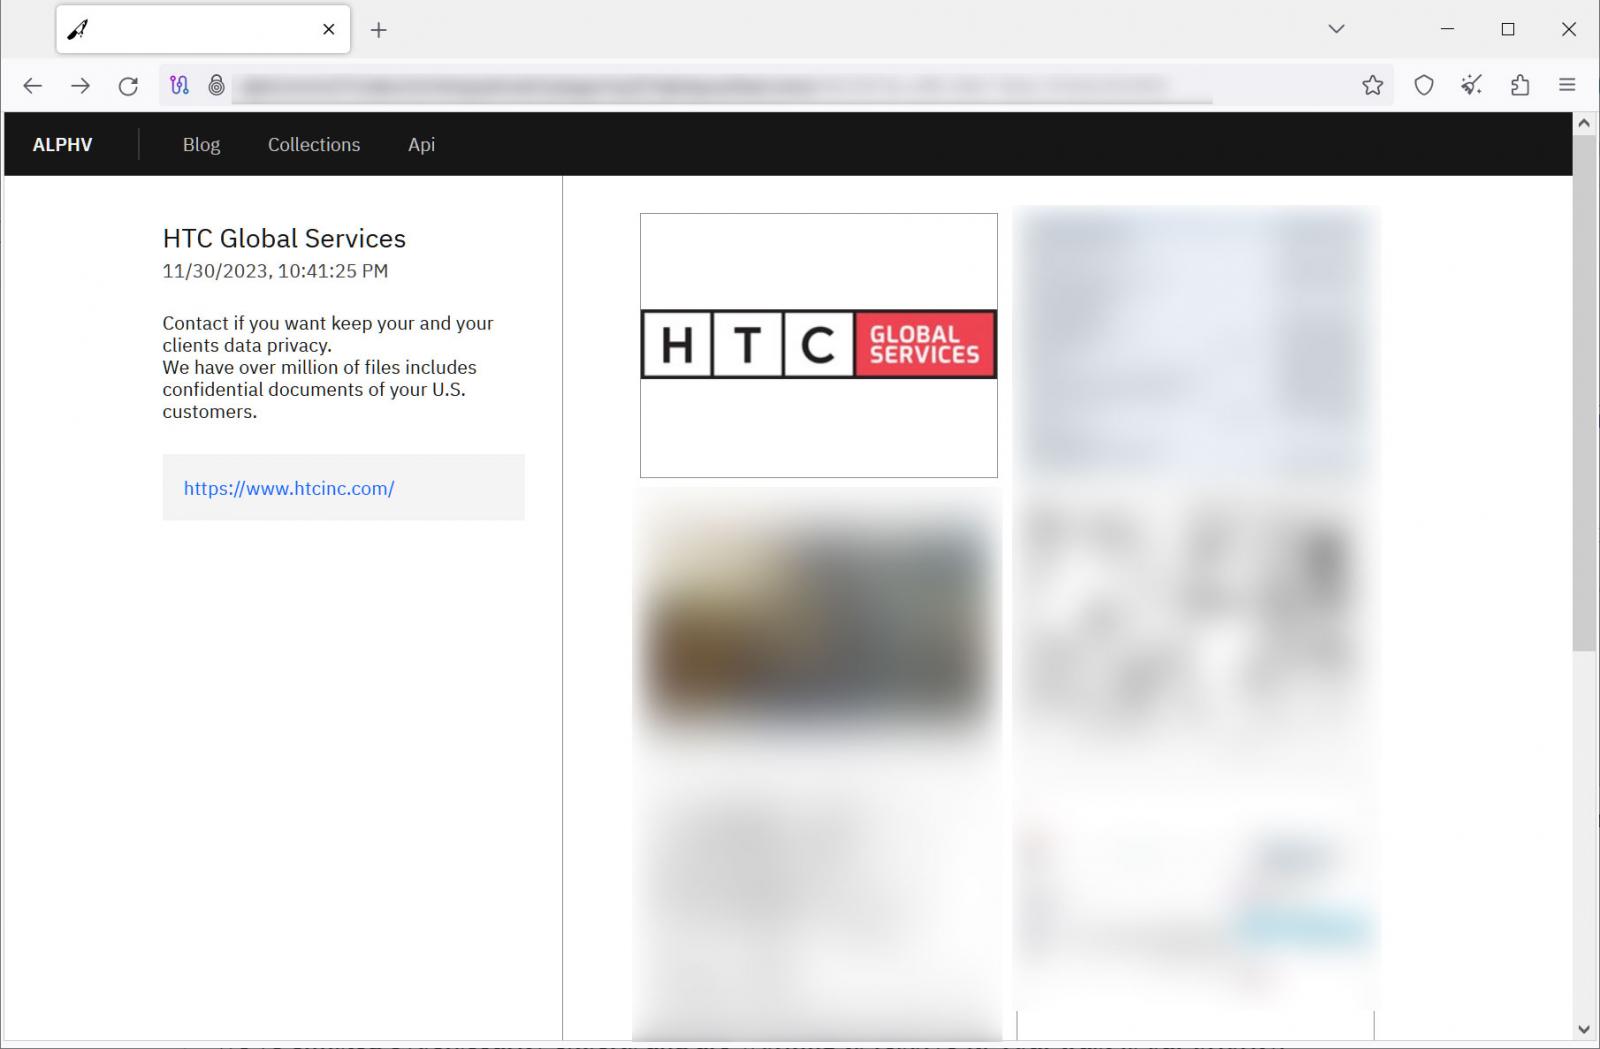 HTC Global Services entry on the ALPHV data leak site